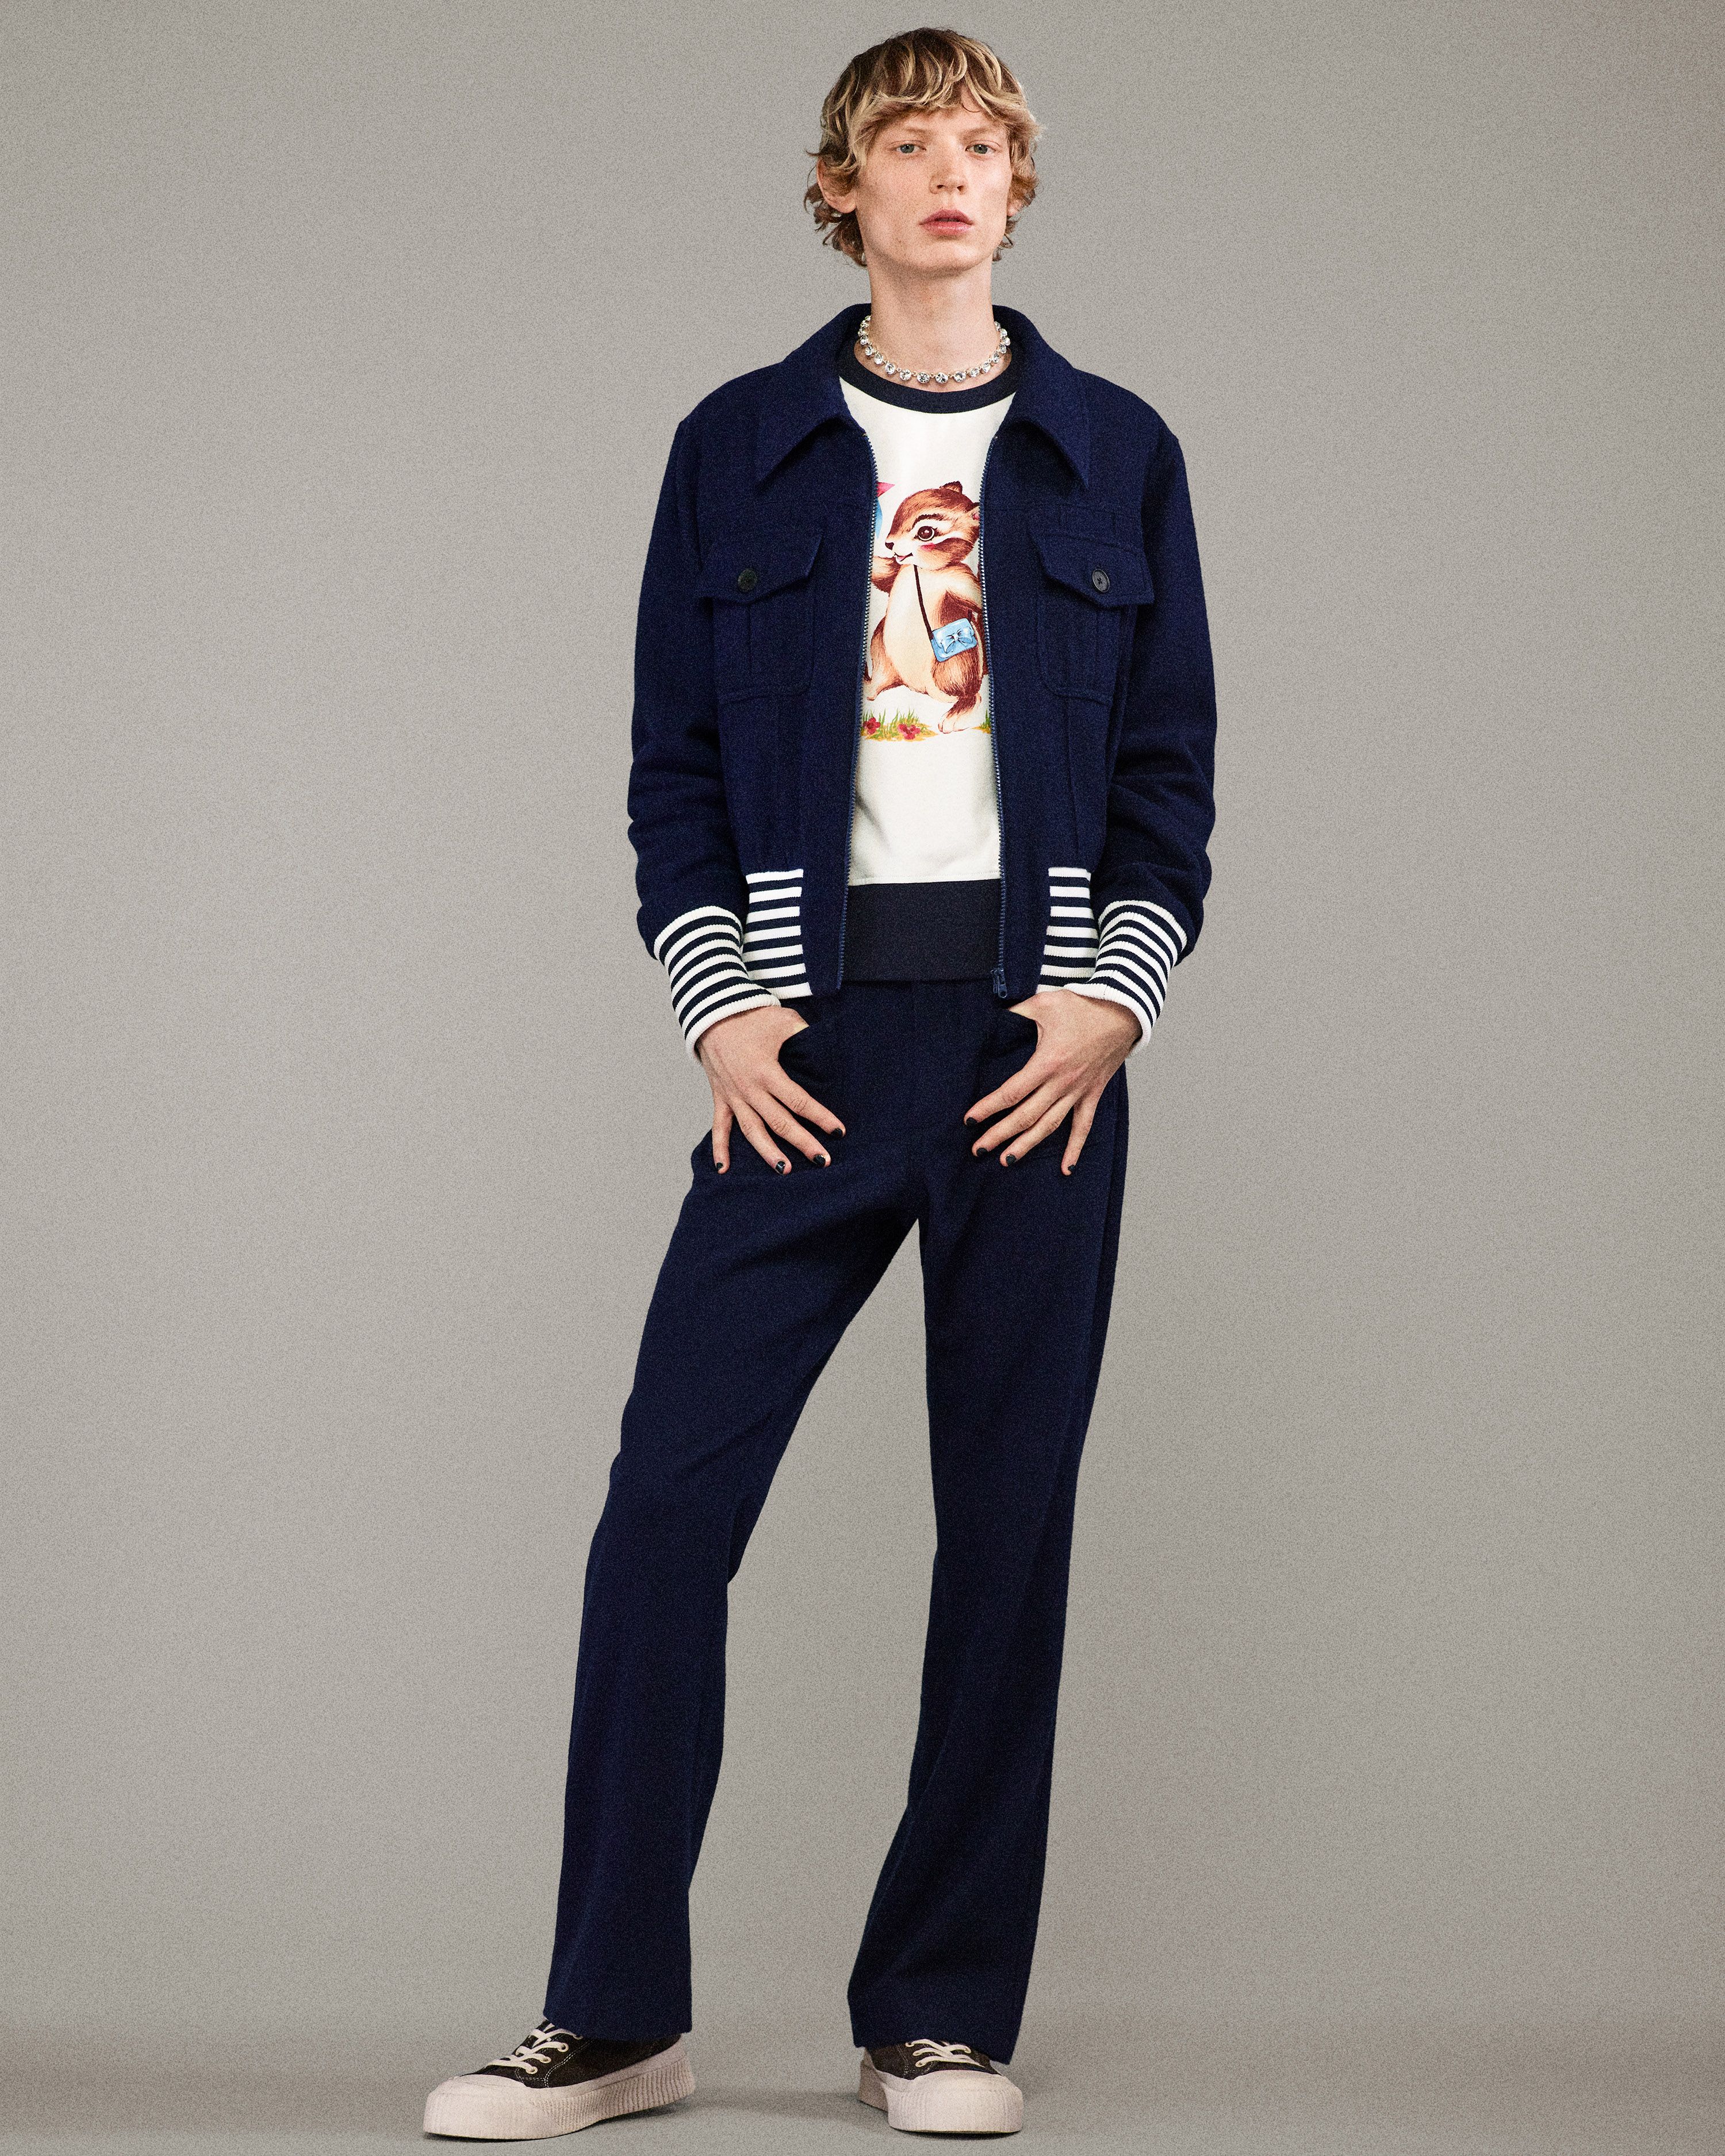 Superstar Stylist Harry Lambert Takes the High Street With a  Vintage-Inspired Zara Collection